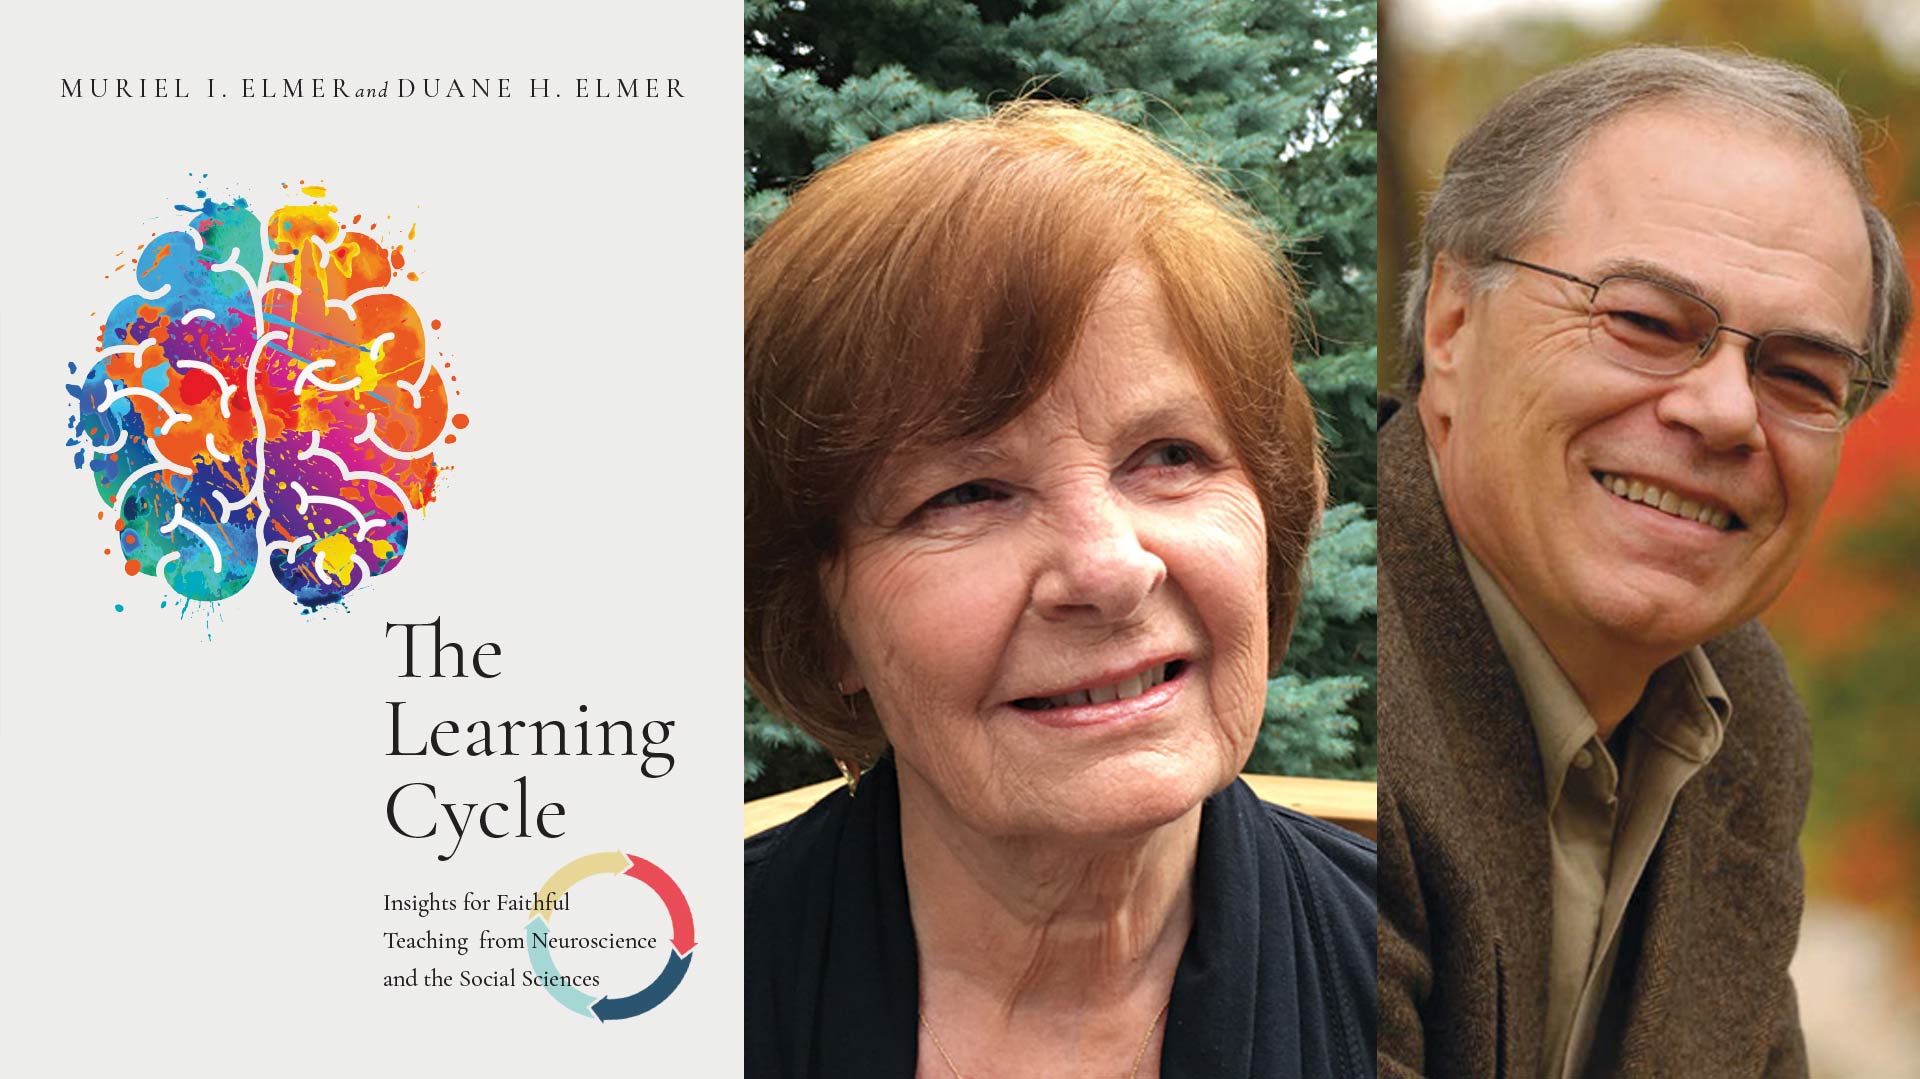 The Learning Cycle – Interview with Muriel & Duane Elmer